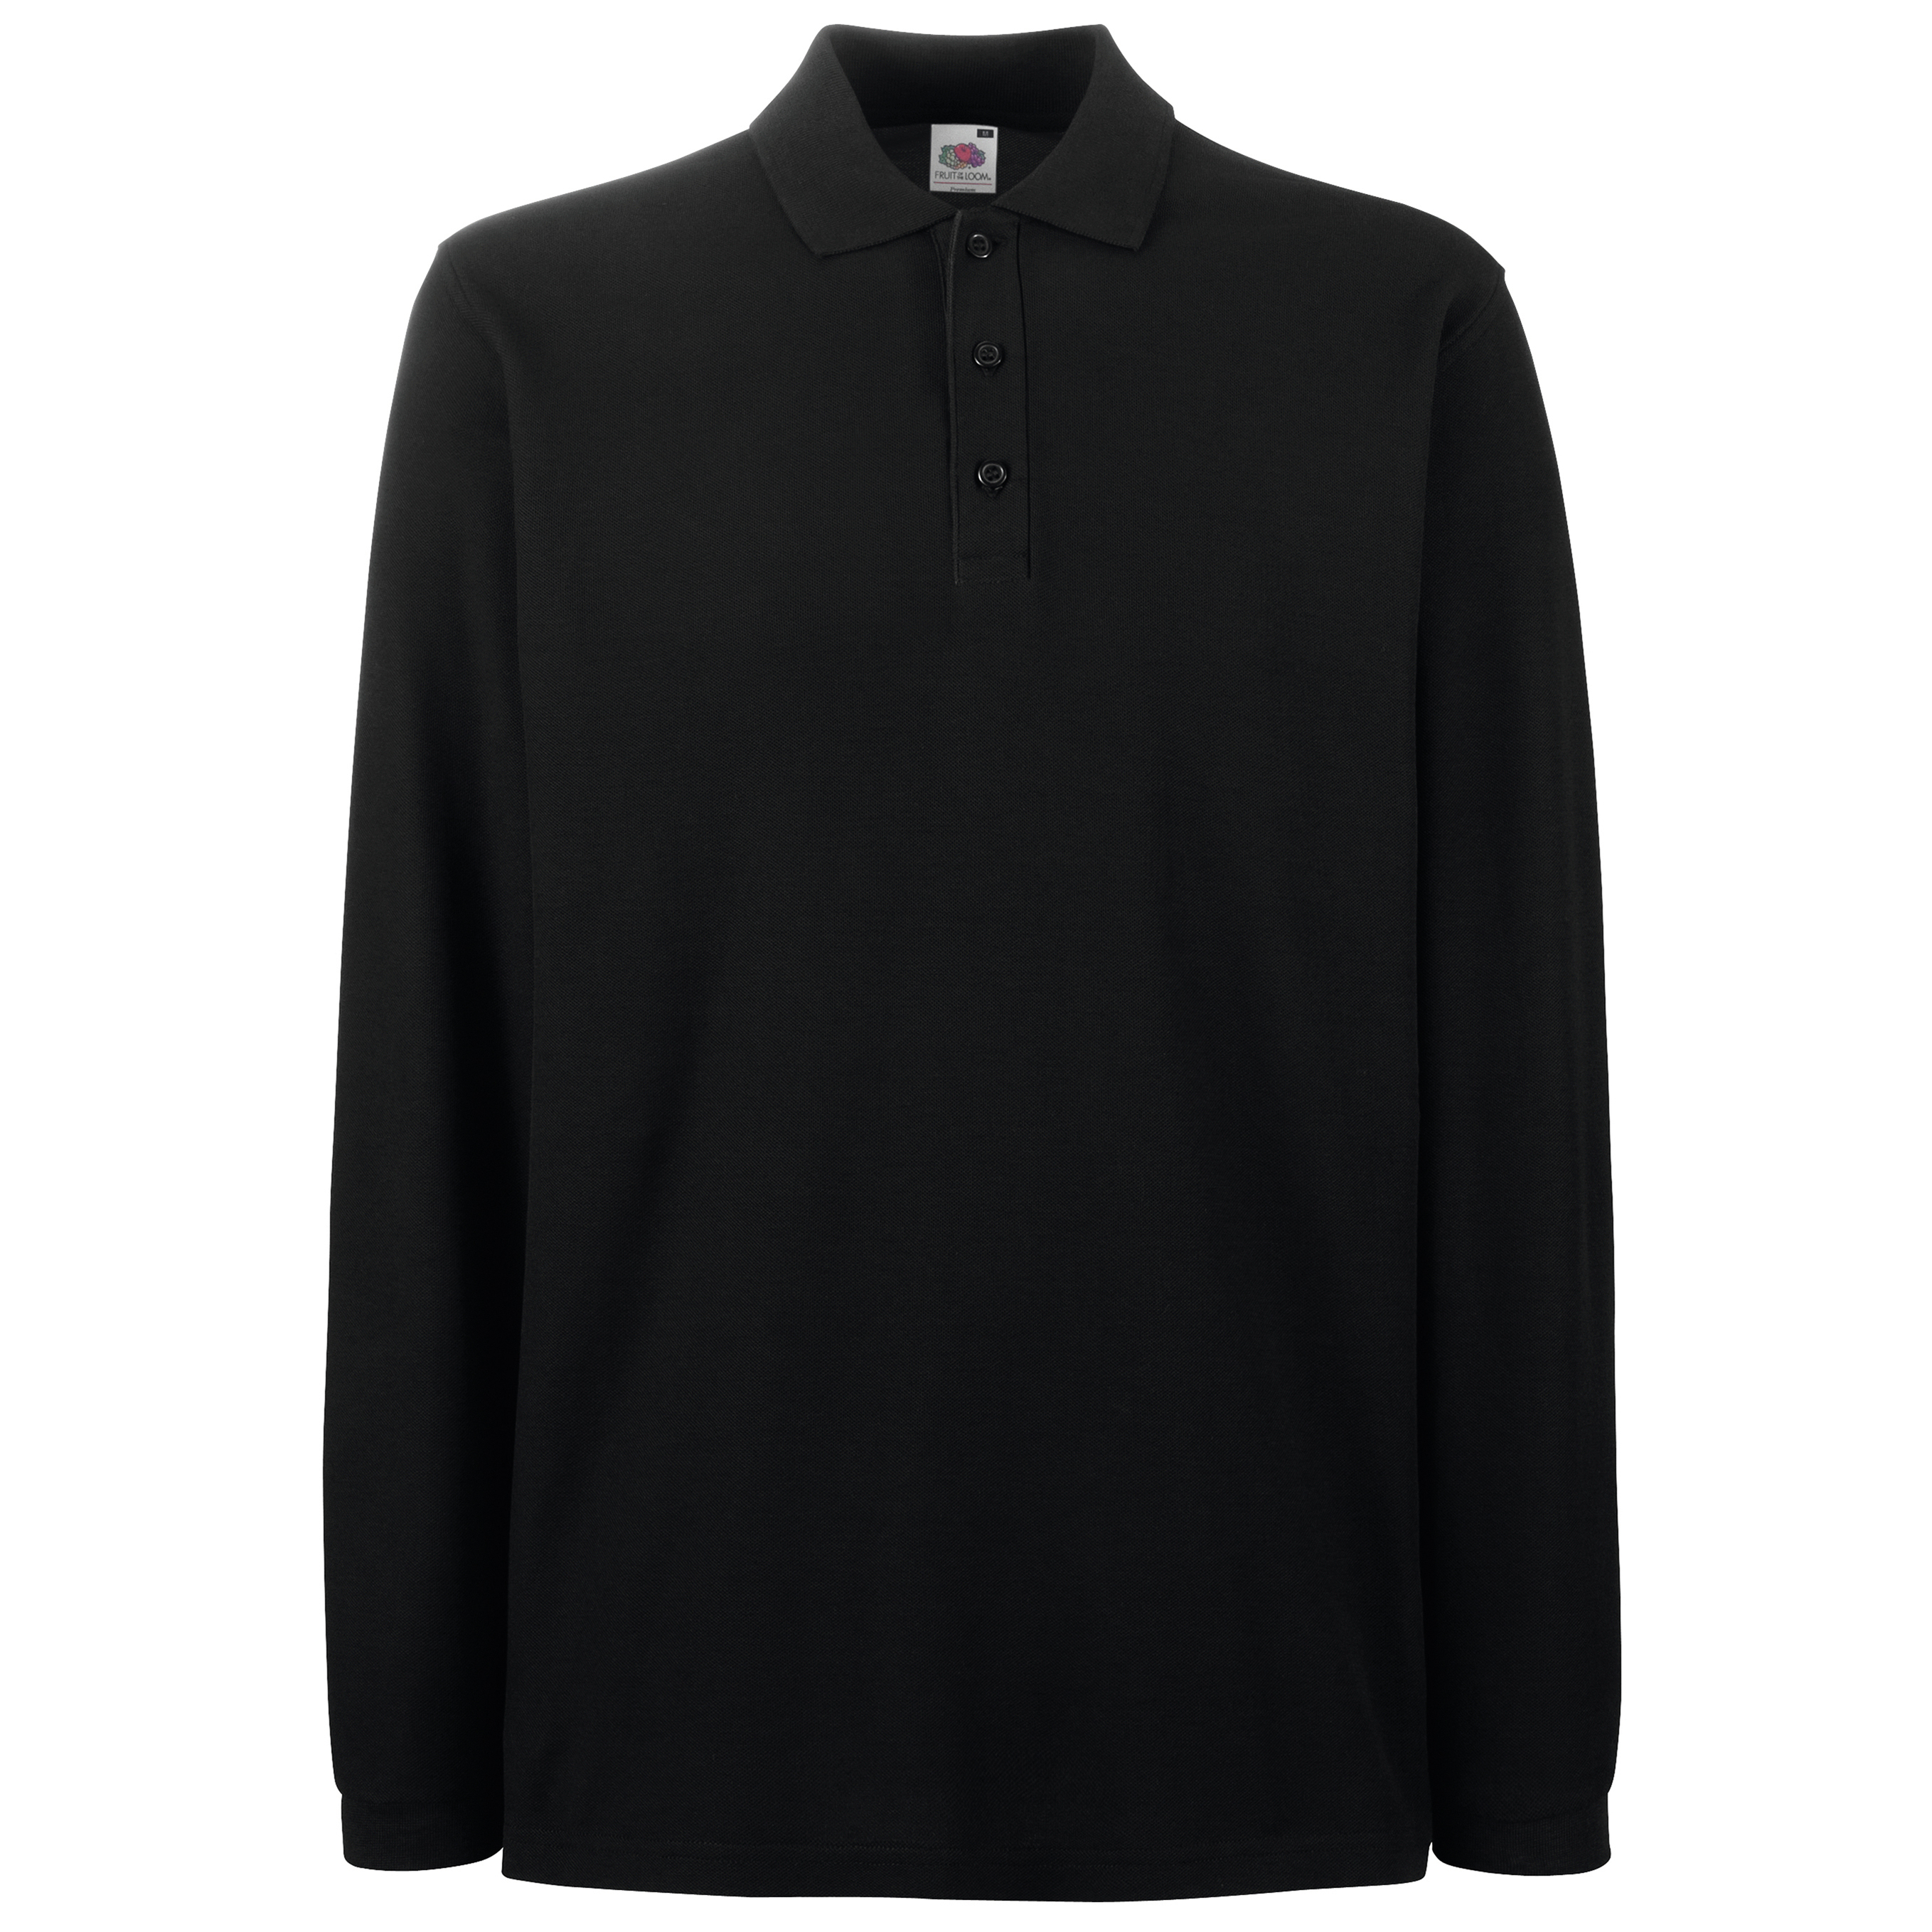 ax-httpswebsystems.s3.amazonaws.comtmp_for_downloadfruit-of-the-loom-long-sleeve-polo-black.jpg